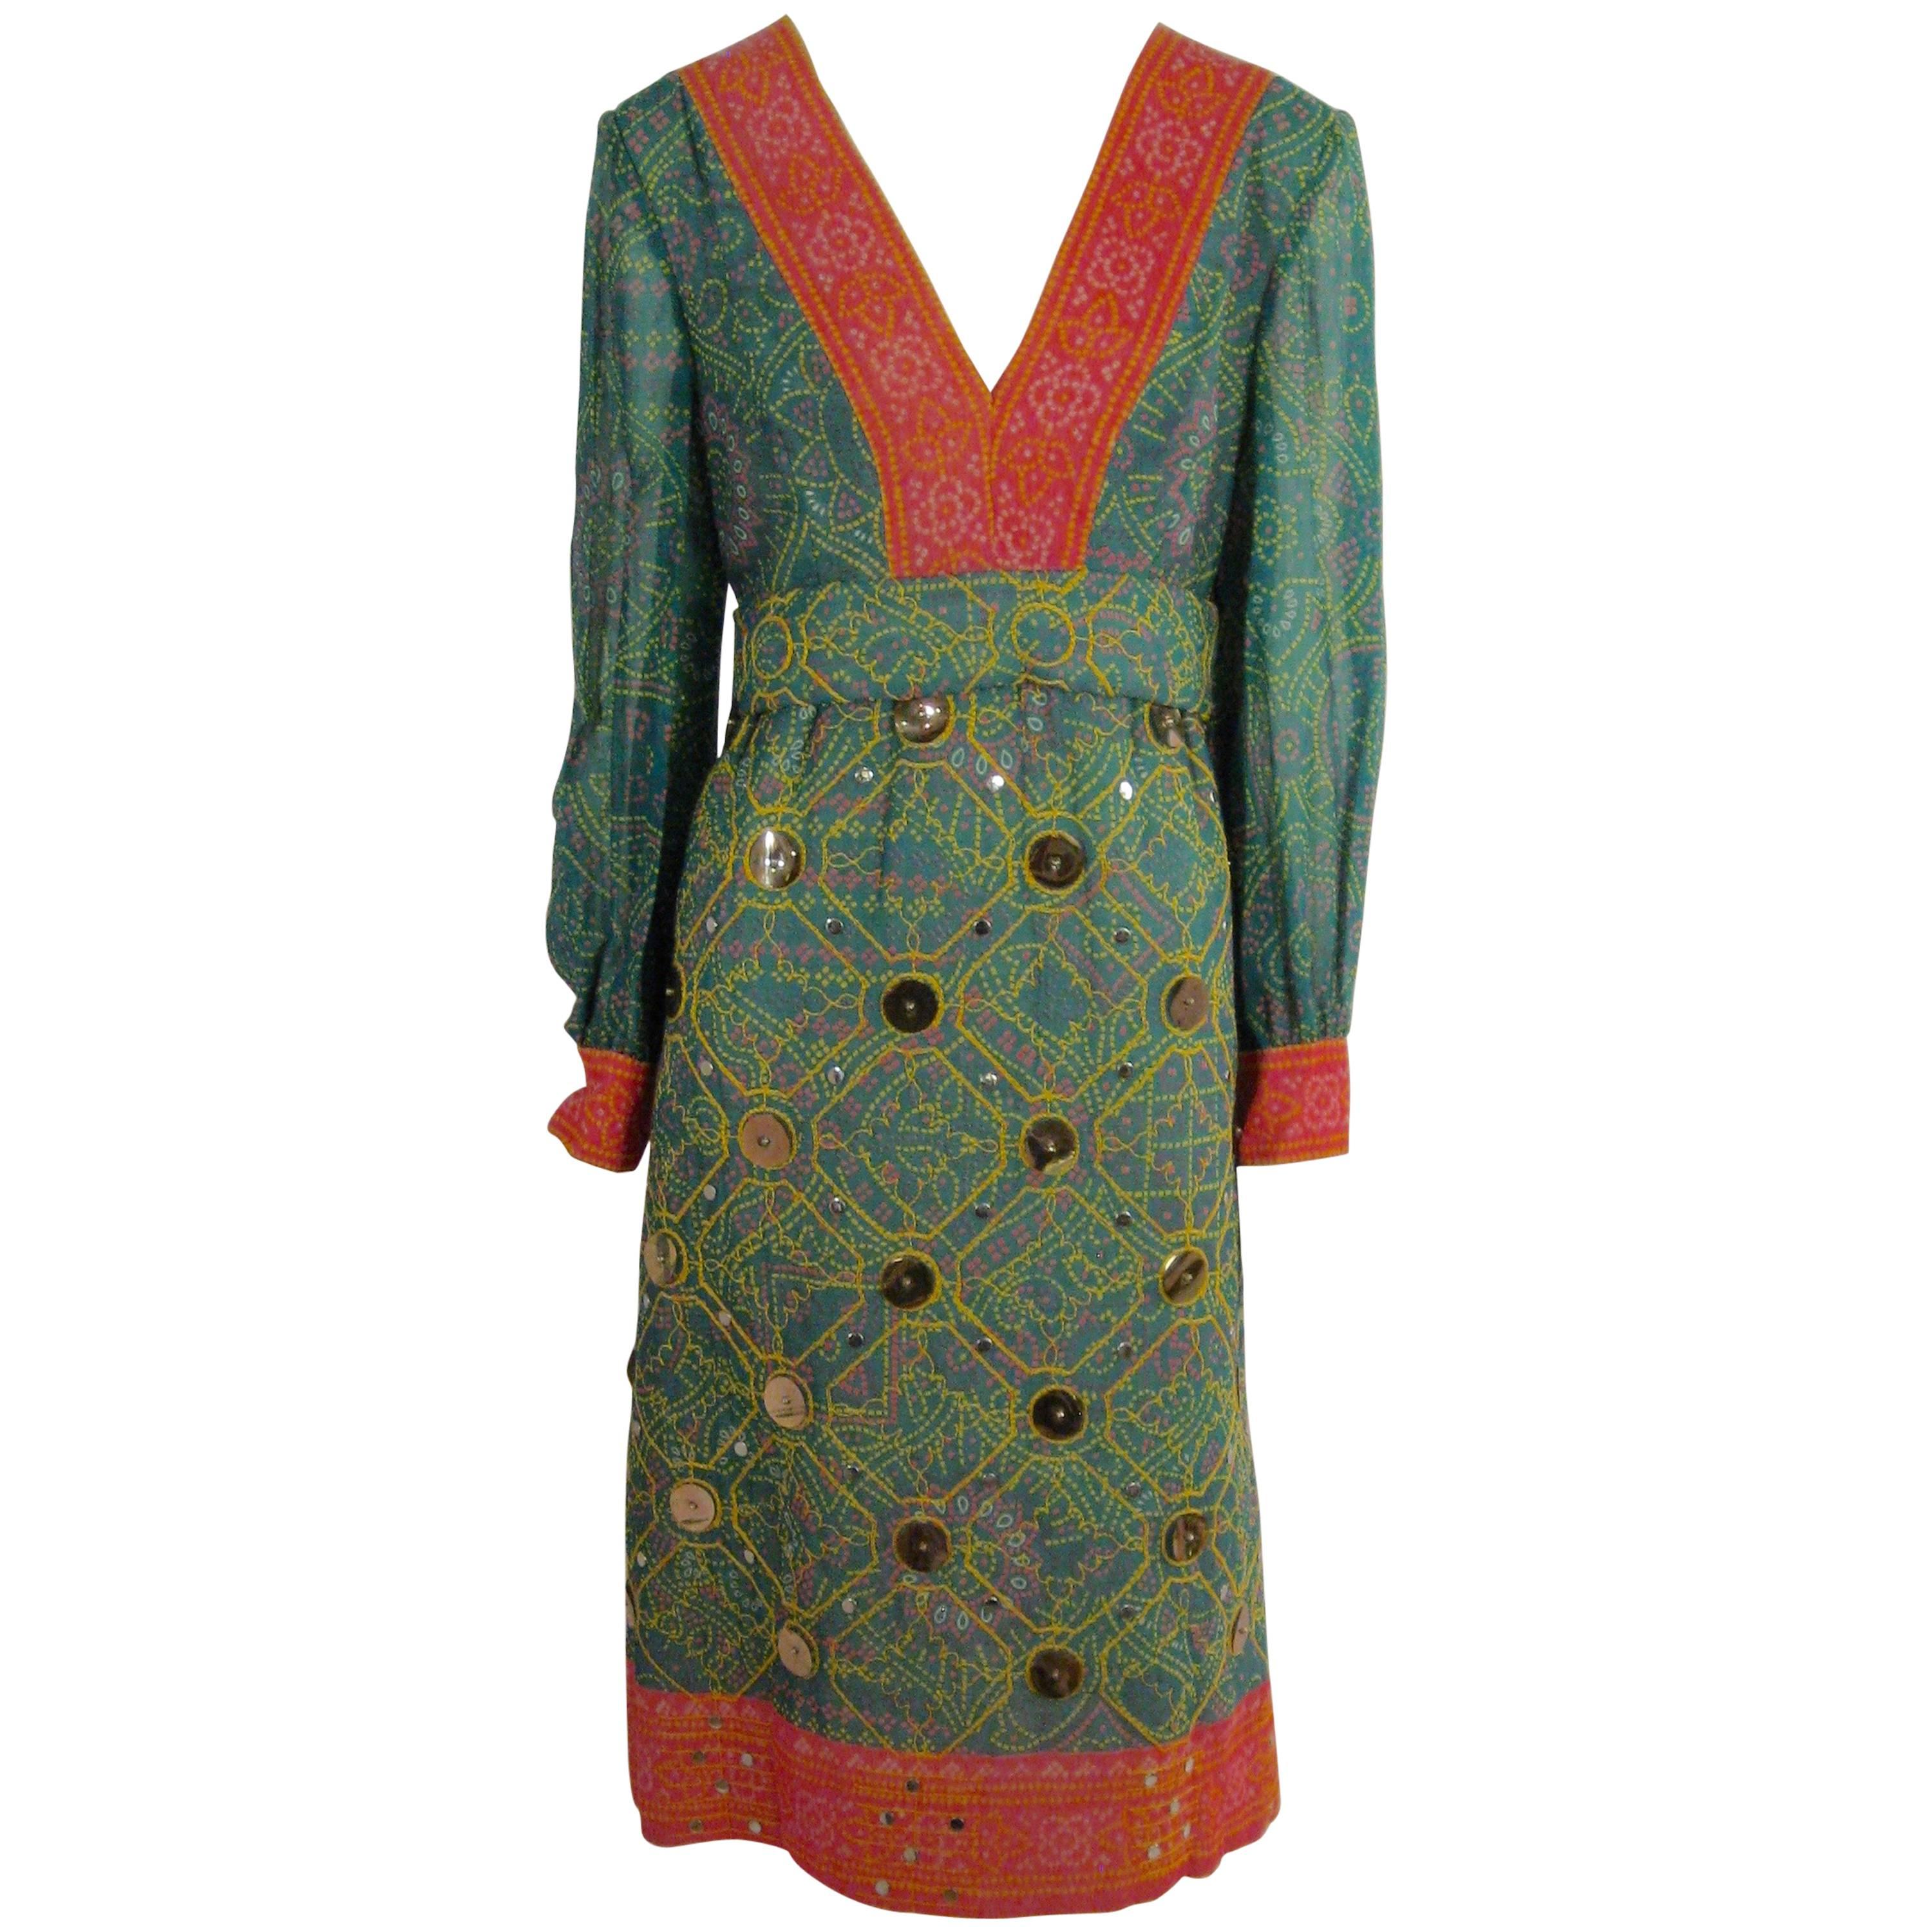 Oscar de la Renta Attributed 1970s Ethnic Print Dress with Embroidery Paillettes